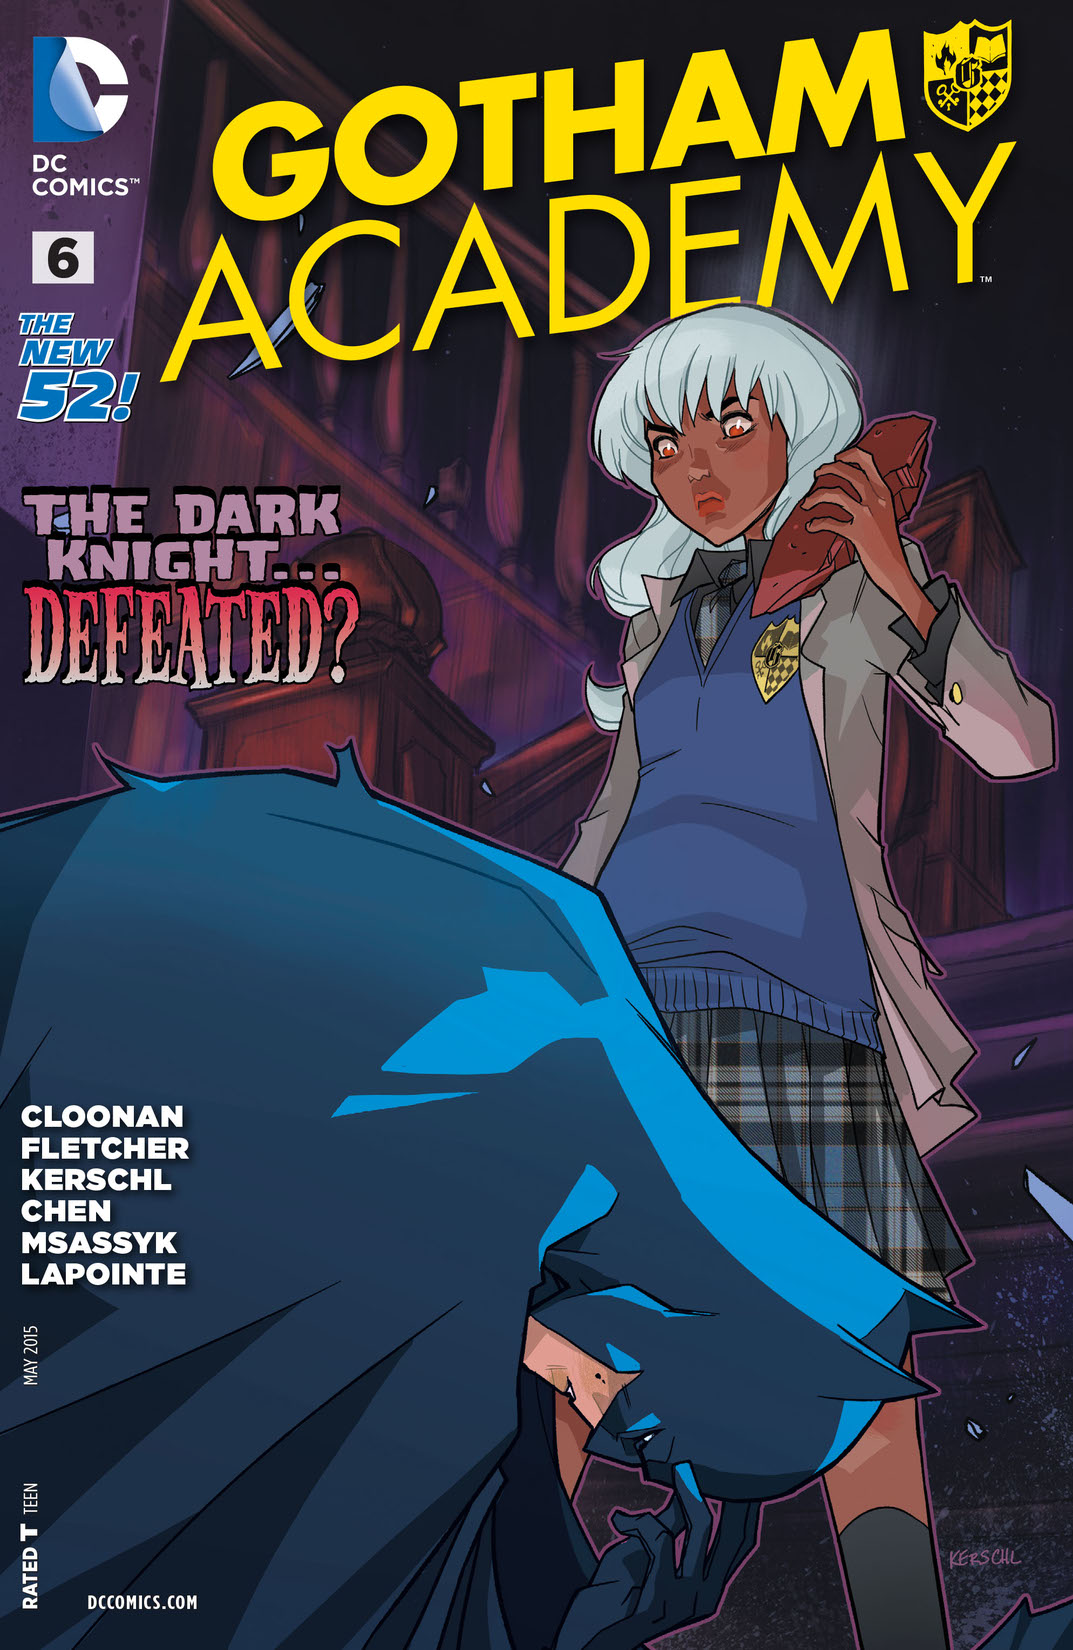 Gotham Academy #6 preview images